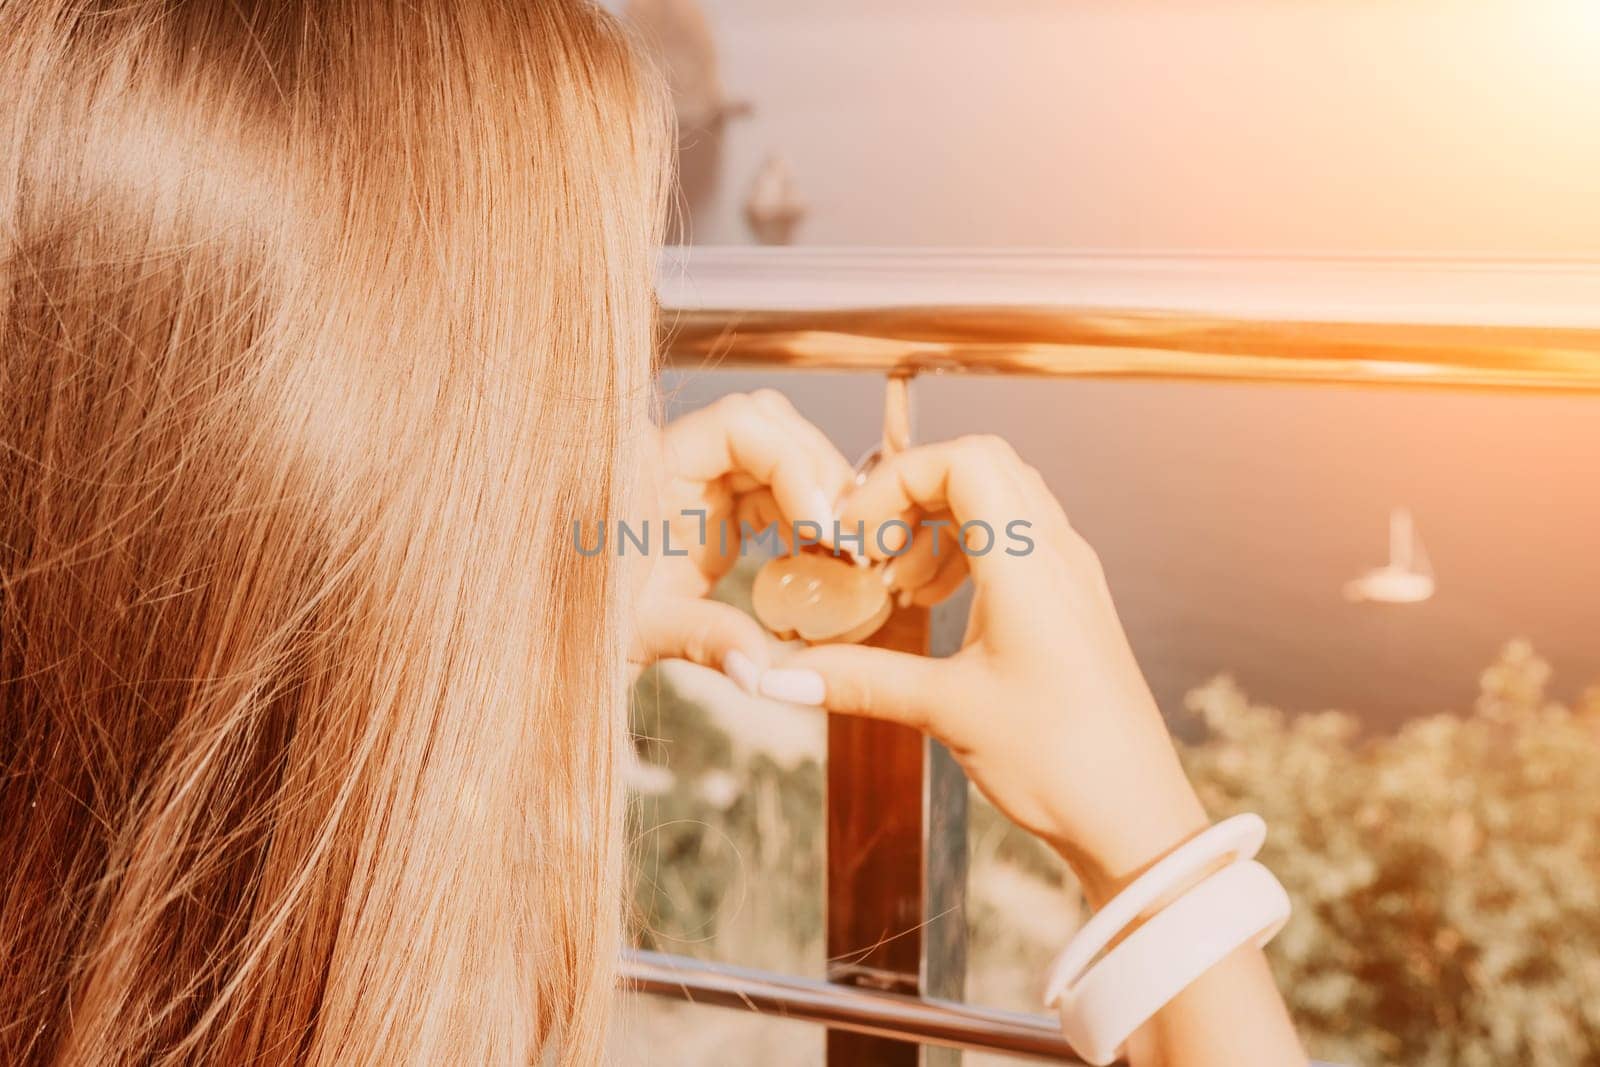 Hand, lock, heart, love, valentines day. Close up view of a woman holding a heart shaped lock that is locked onto a chain link fence.